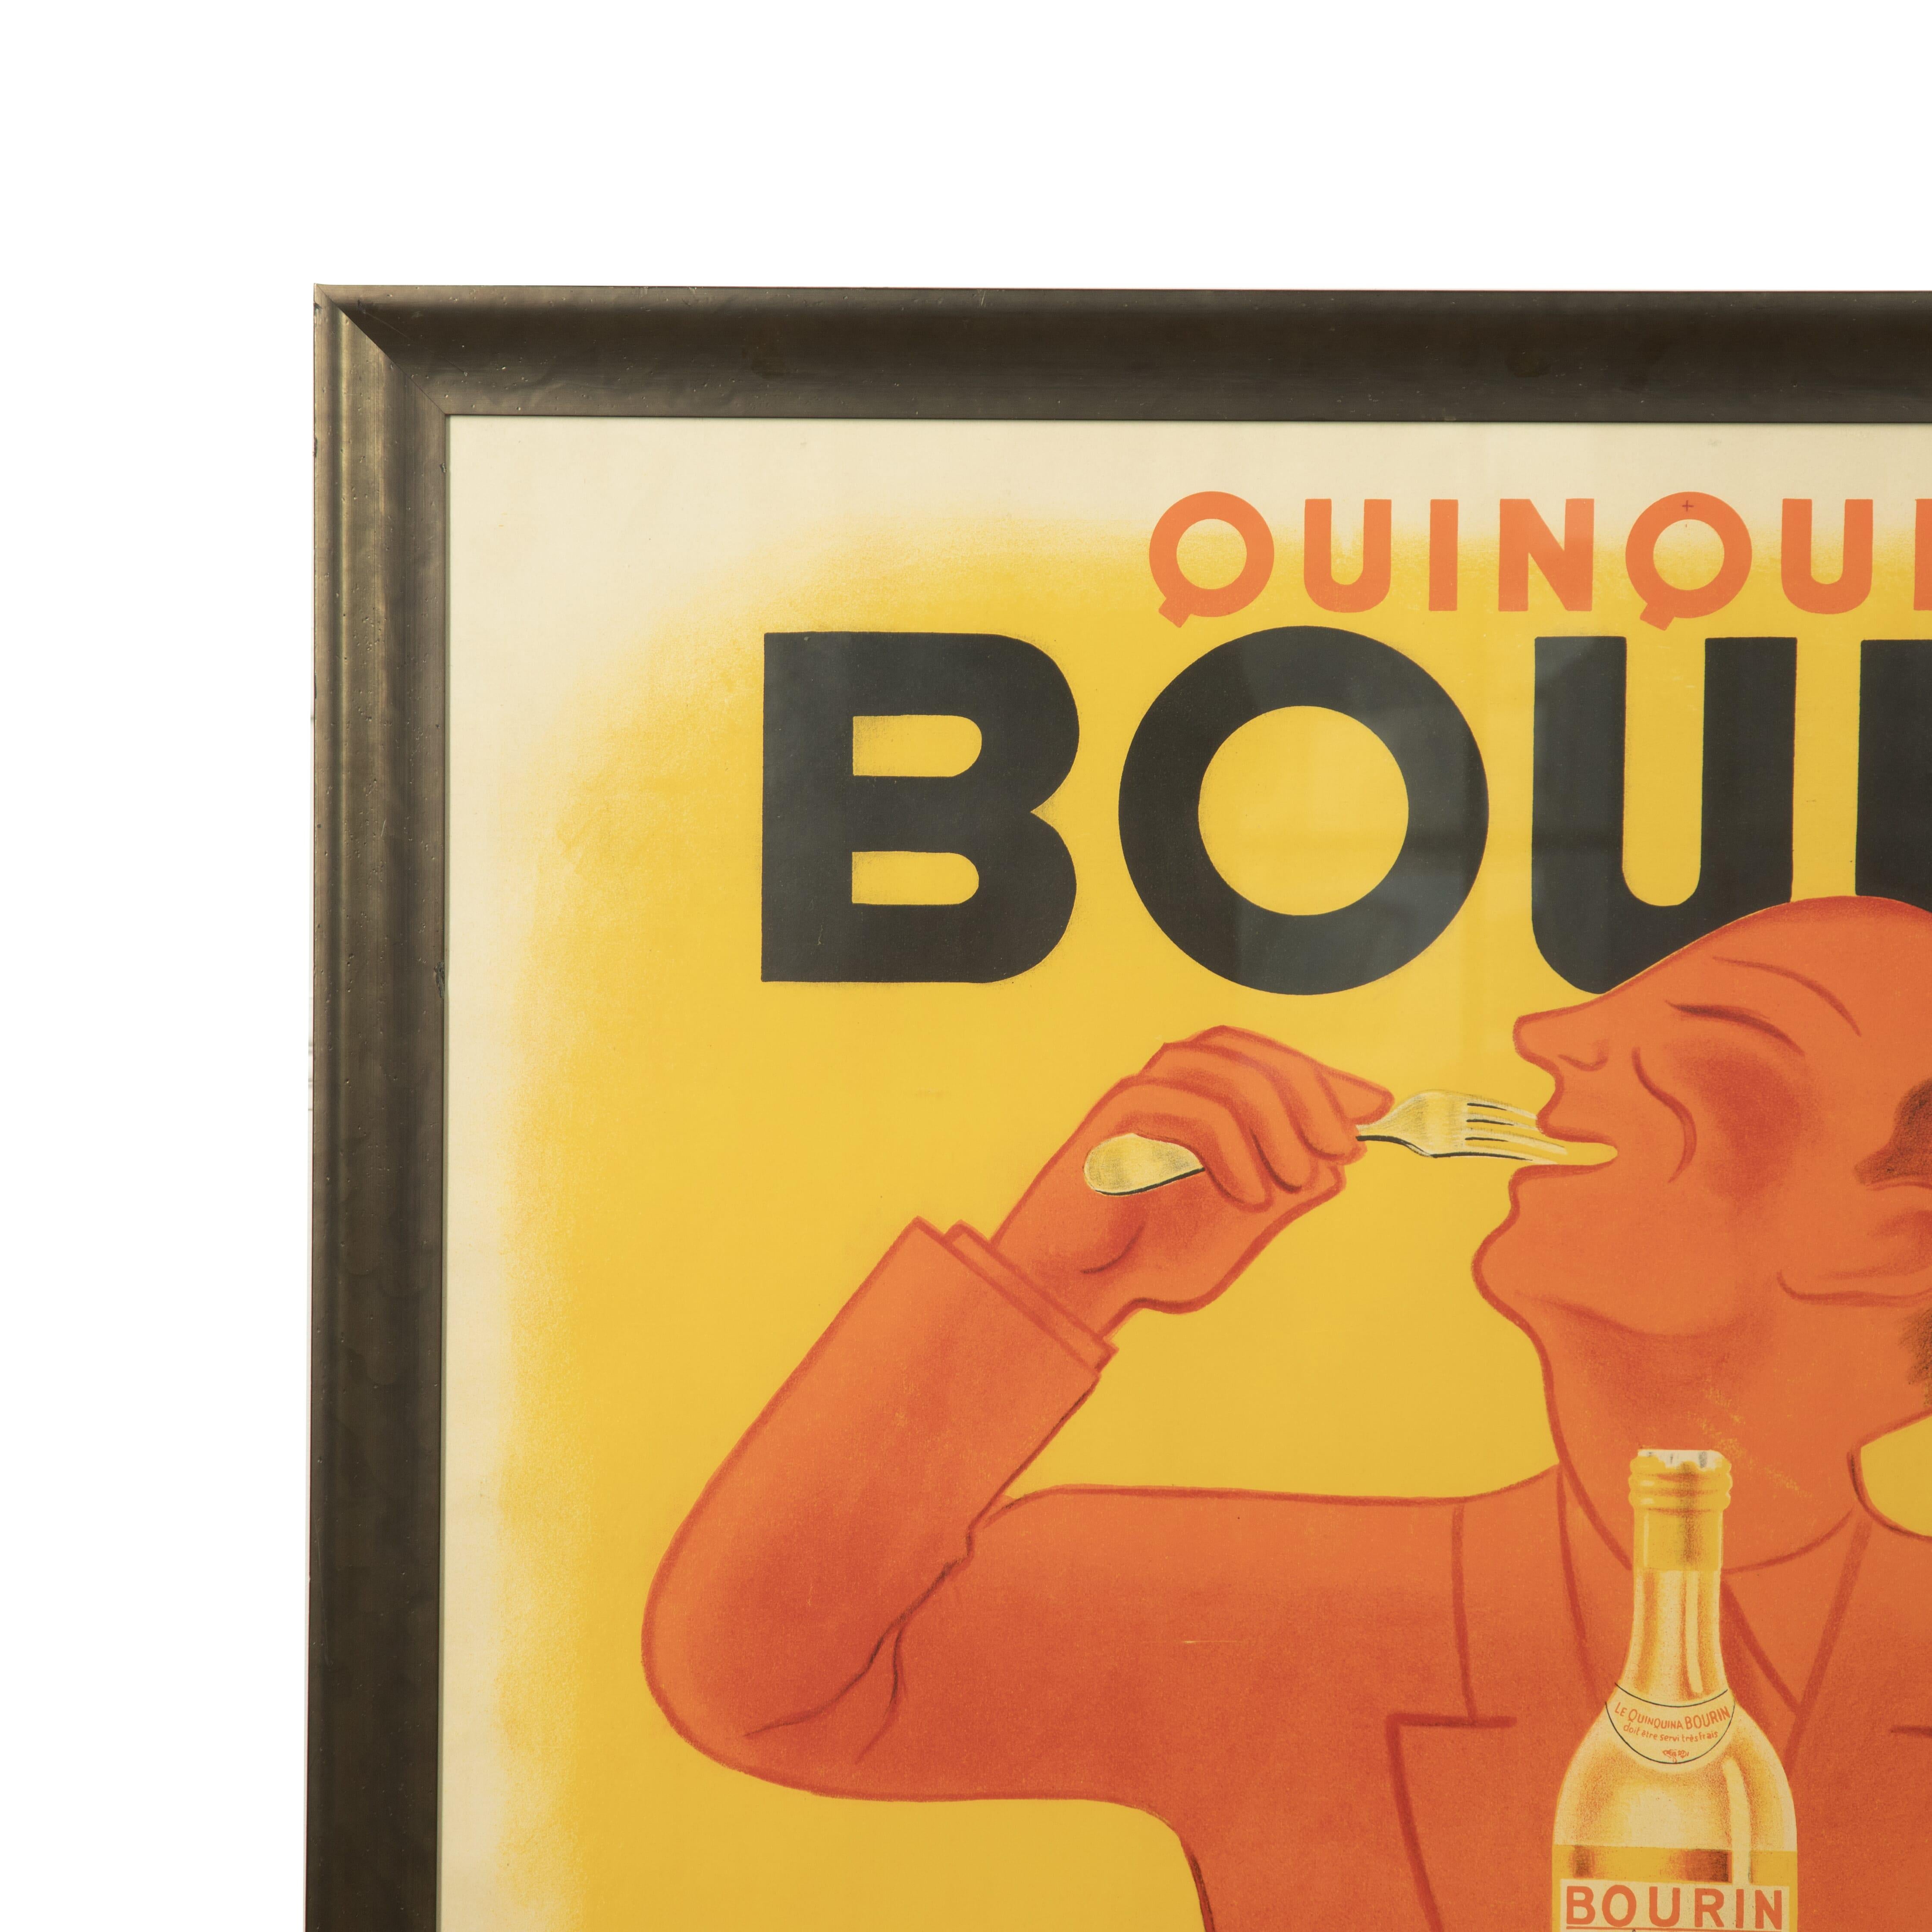 Jacques and Pierre Bellenger designed this original vintage poster in 1936.
This clever image shows that Bourin Quinquina is the perfect versatile beverage that can be enjoyed as an aperitif, while dining, and as an digestif. 
Quinine based drinks